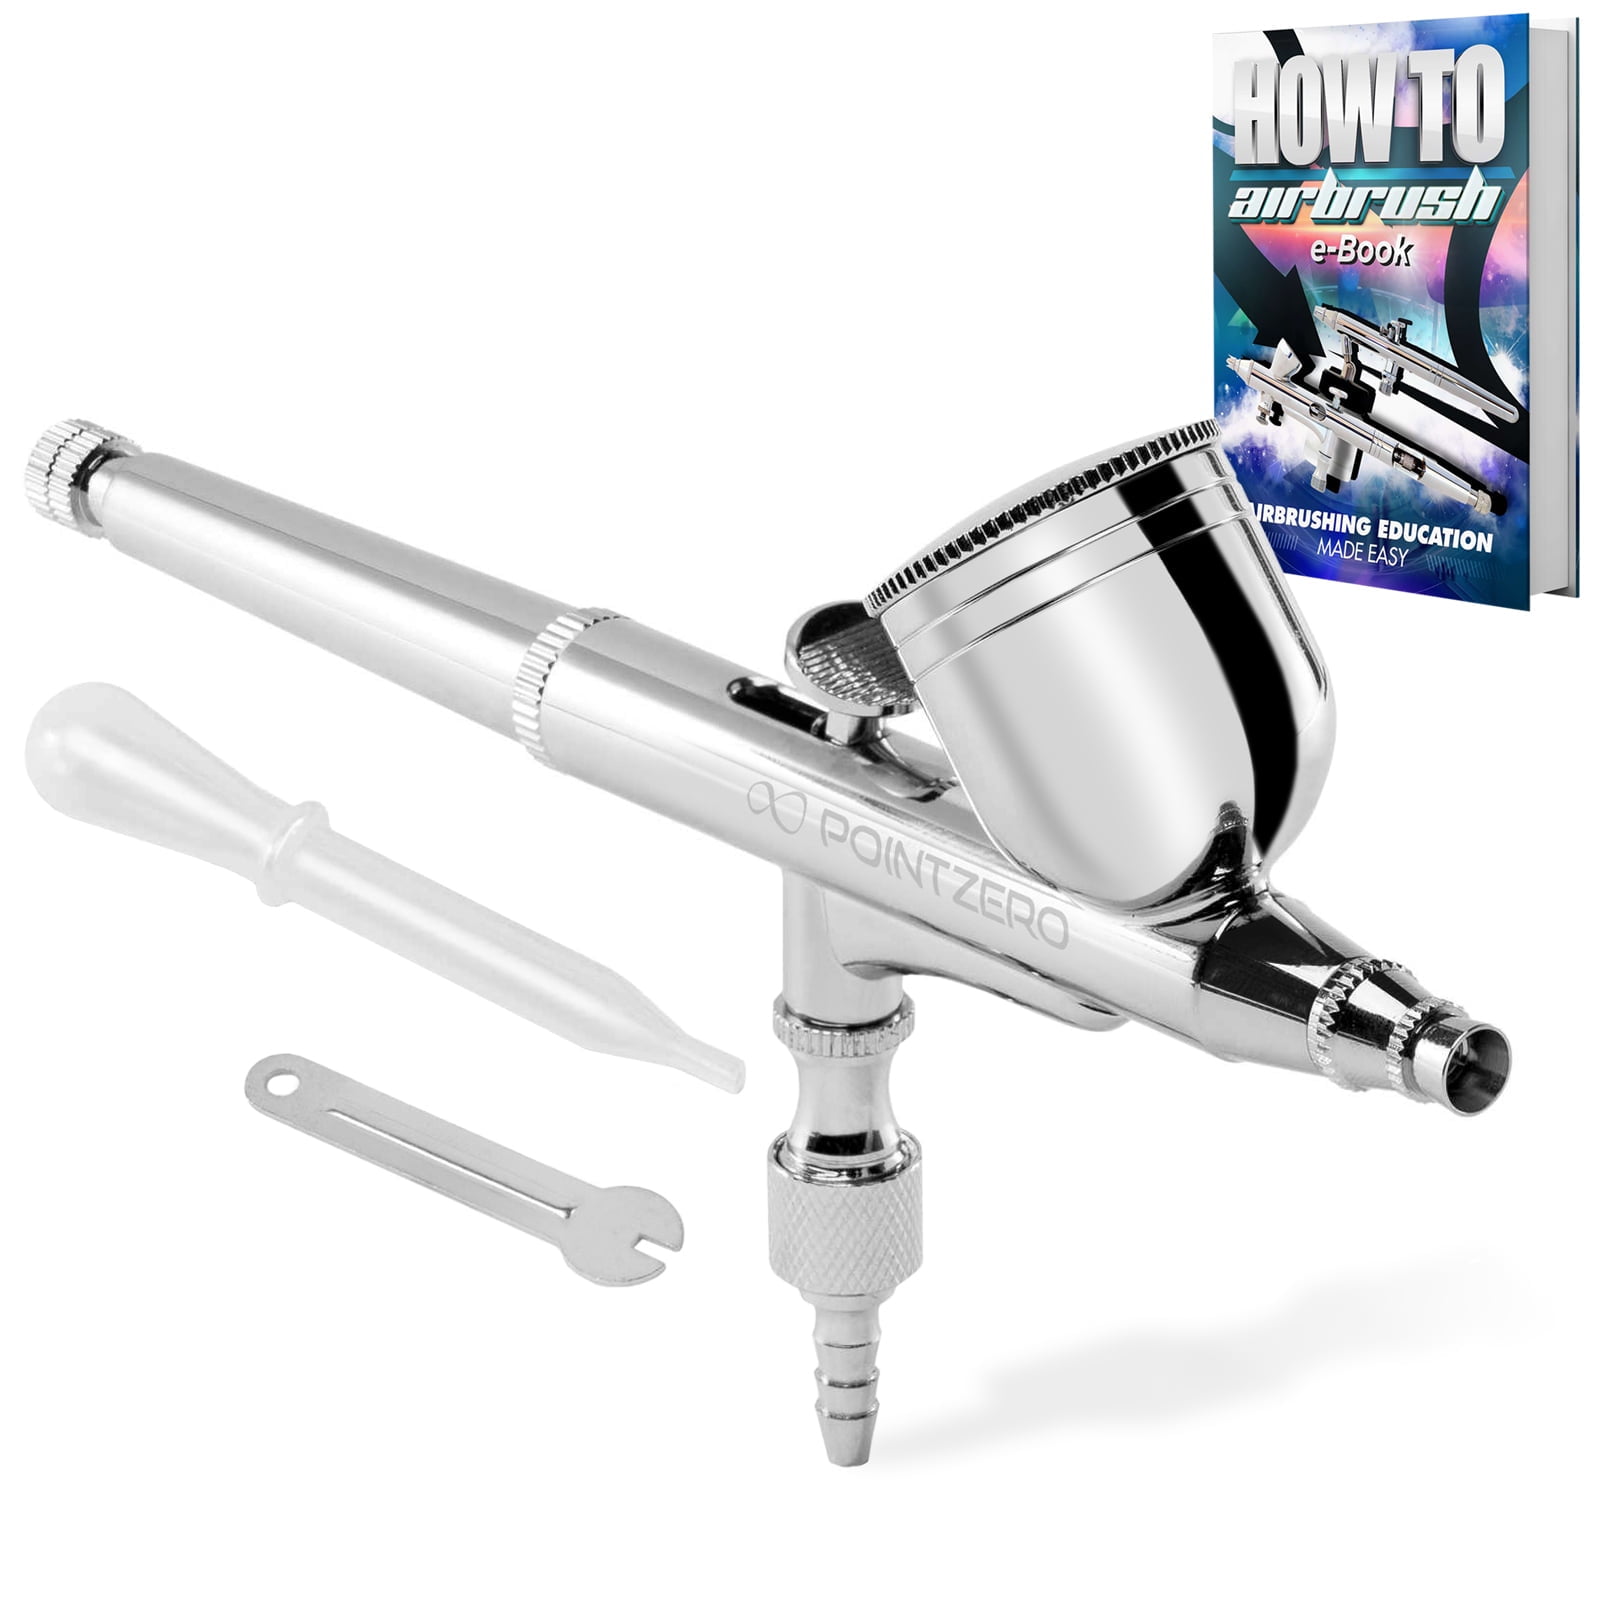 Master Airbrush G233 Pro Set with 3 Nozzle Sets - Dual-Action Gravity Feed  Airbrush with Cutaway Handle and How-To Guide